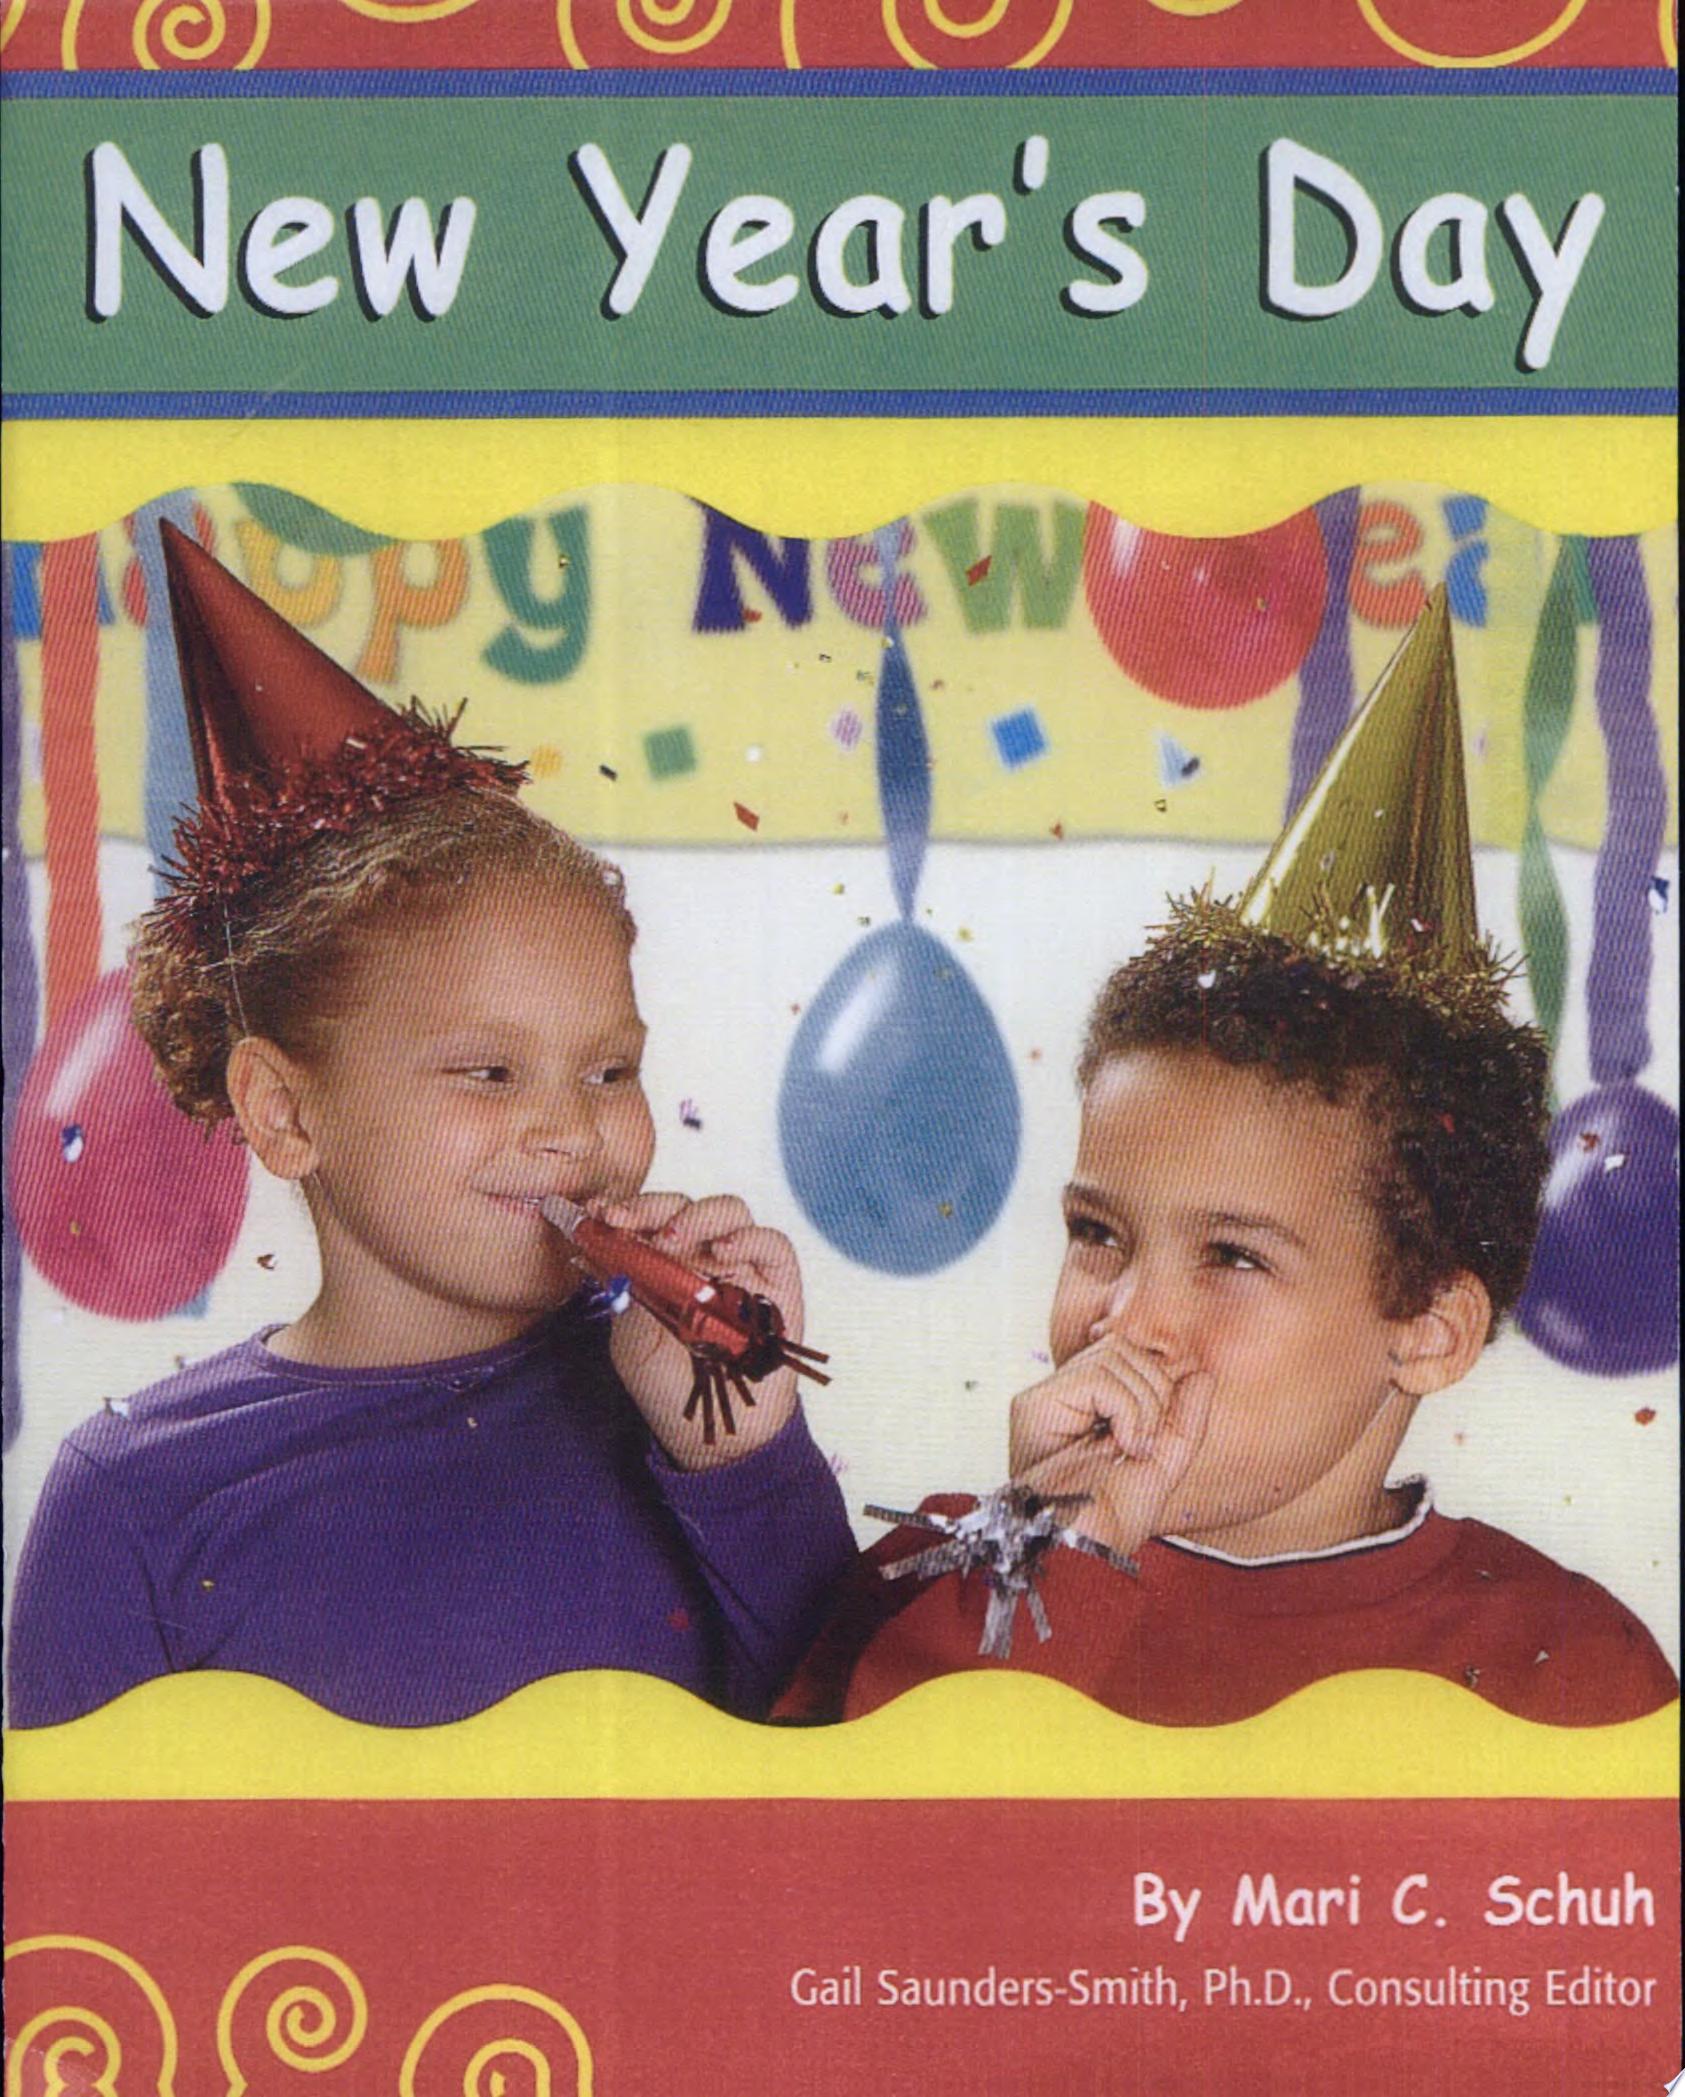 Image for "New Year's Day"